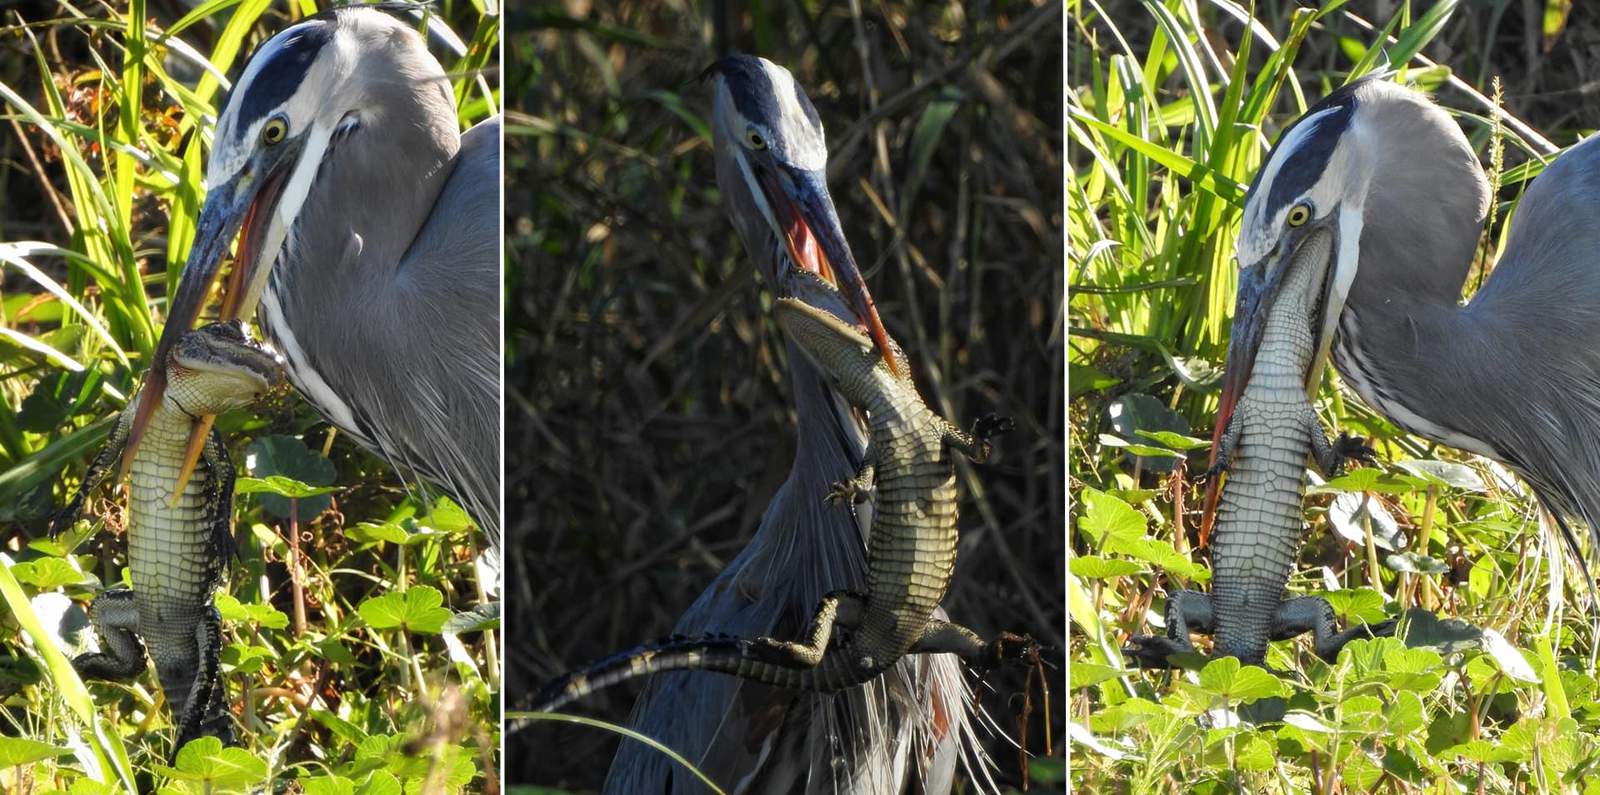 Nature caught on camera: Frame-by-frame photos show heron devouring alligator